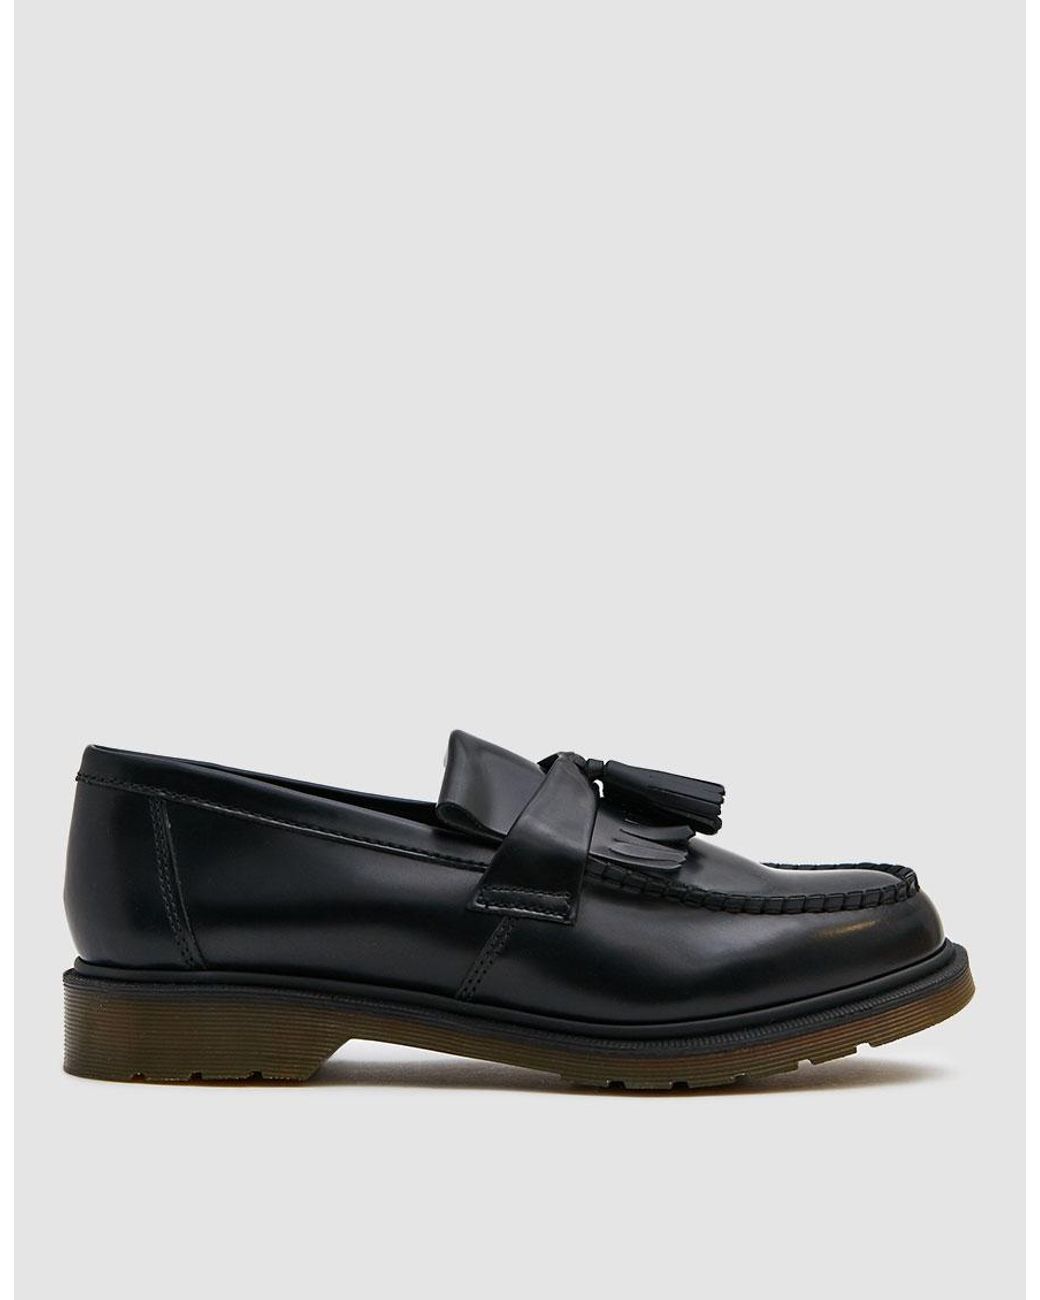 Dr. Martens Leather Black Adrian Loafers for Men - Save 28% - Lyst